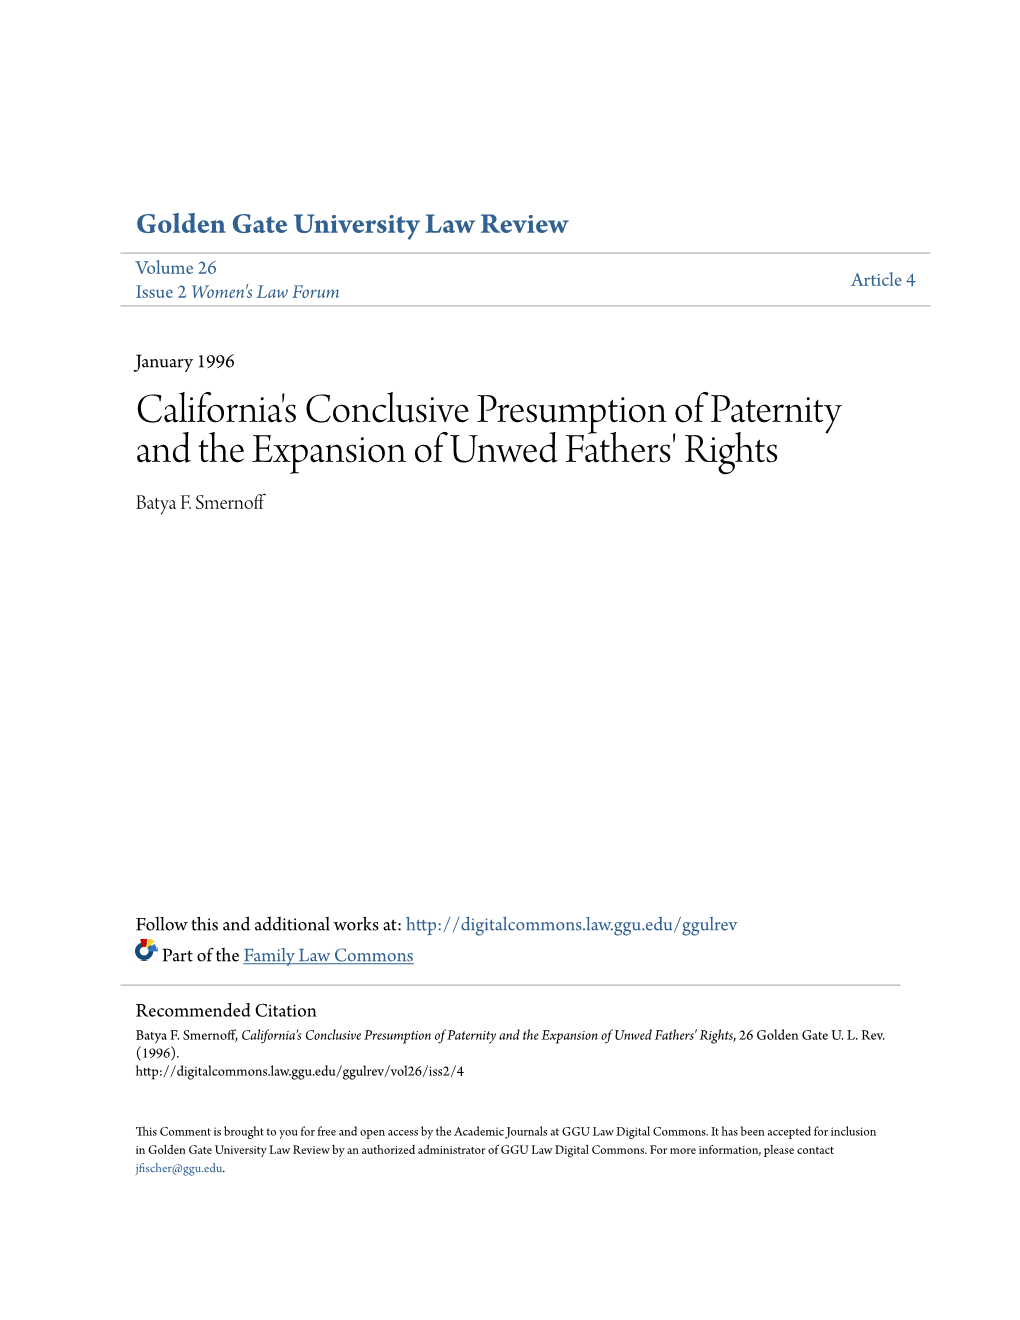 California's Conclusive Presumption of Paternity and the Expansion of Unwed Fathers' Rights Batya F